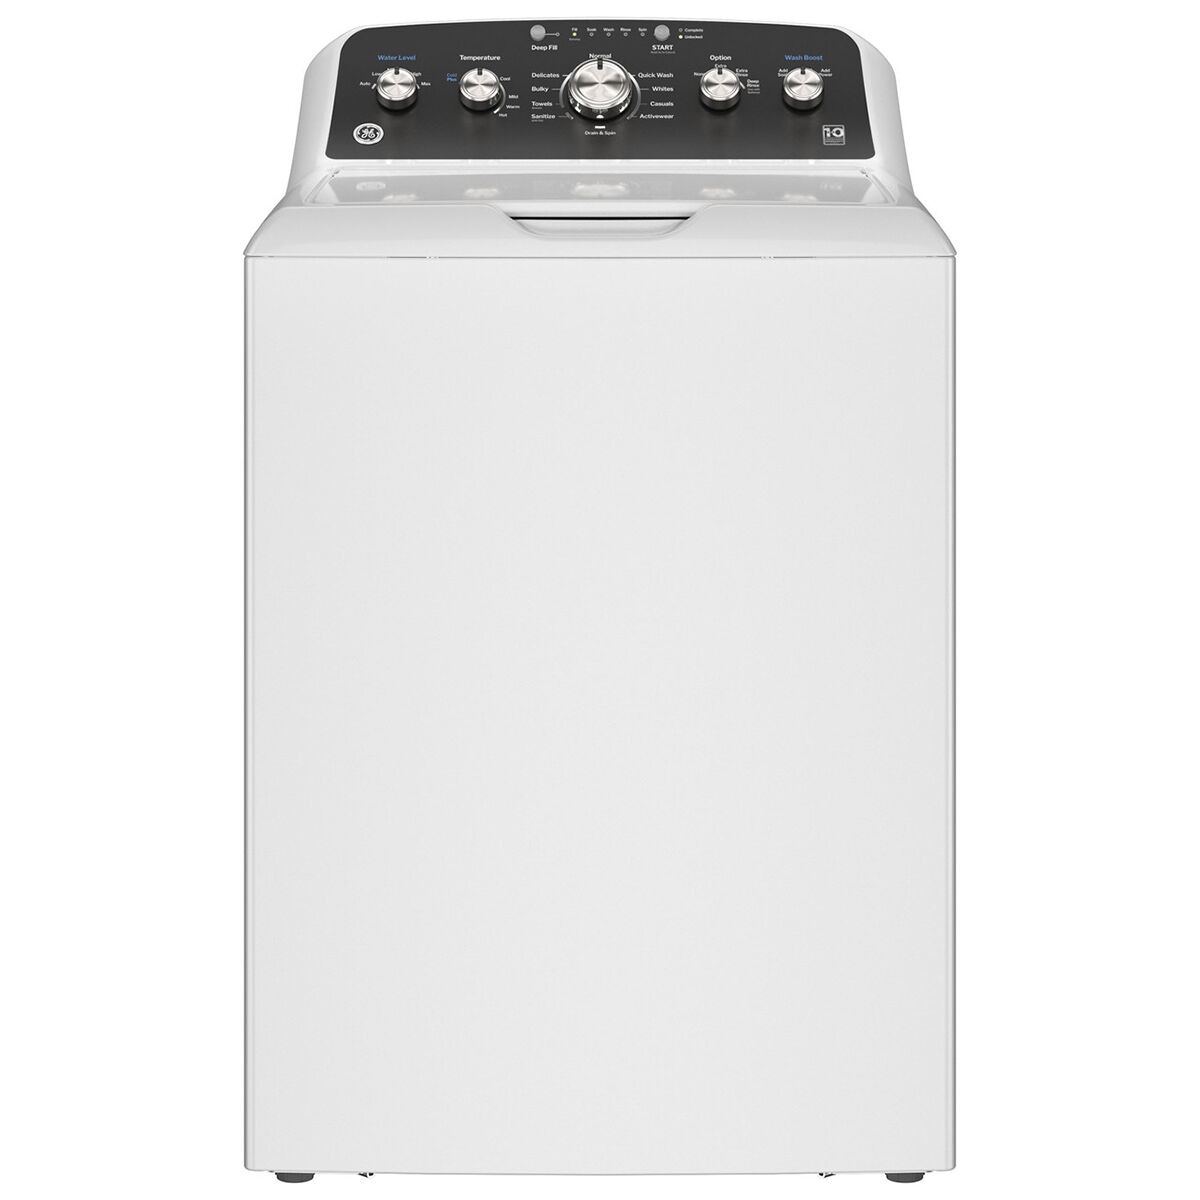 GE 27 in. 4.5 cu. ft. Top Load Washer with Stainless Steel Basket, Cold  Plus, Wash Boost , True Dual-Action Agitator & Sanitize with Oxi - White